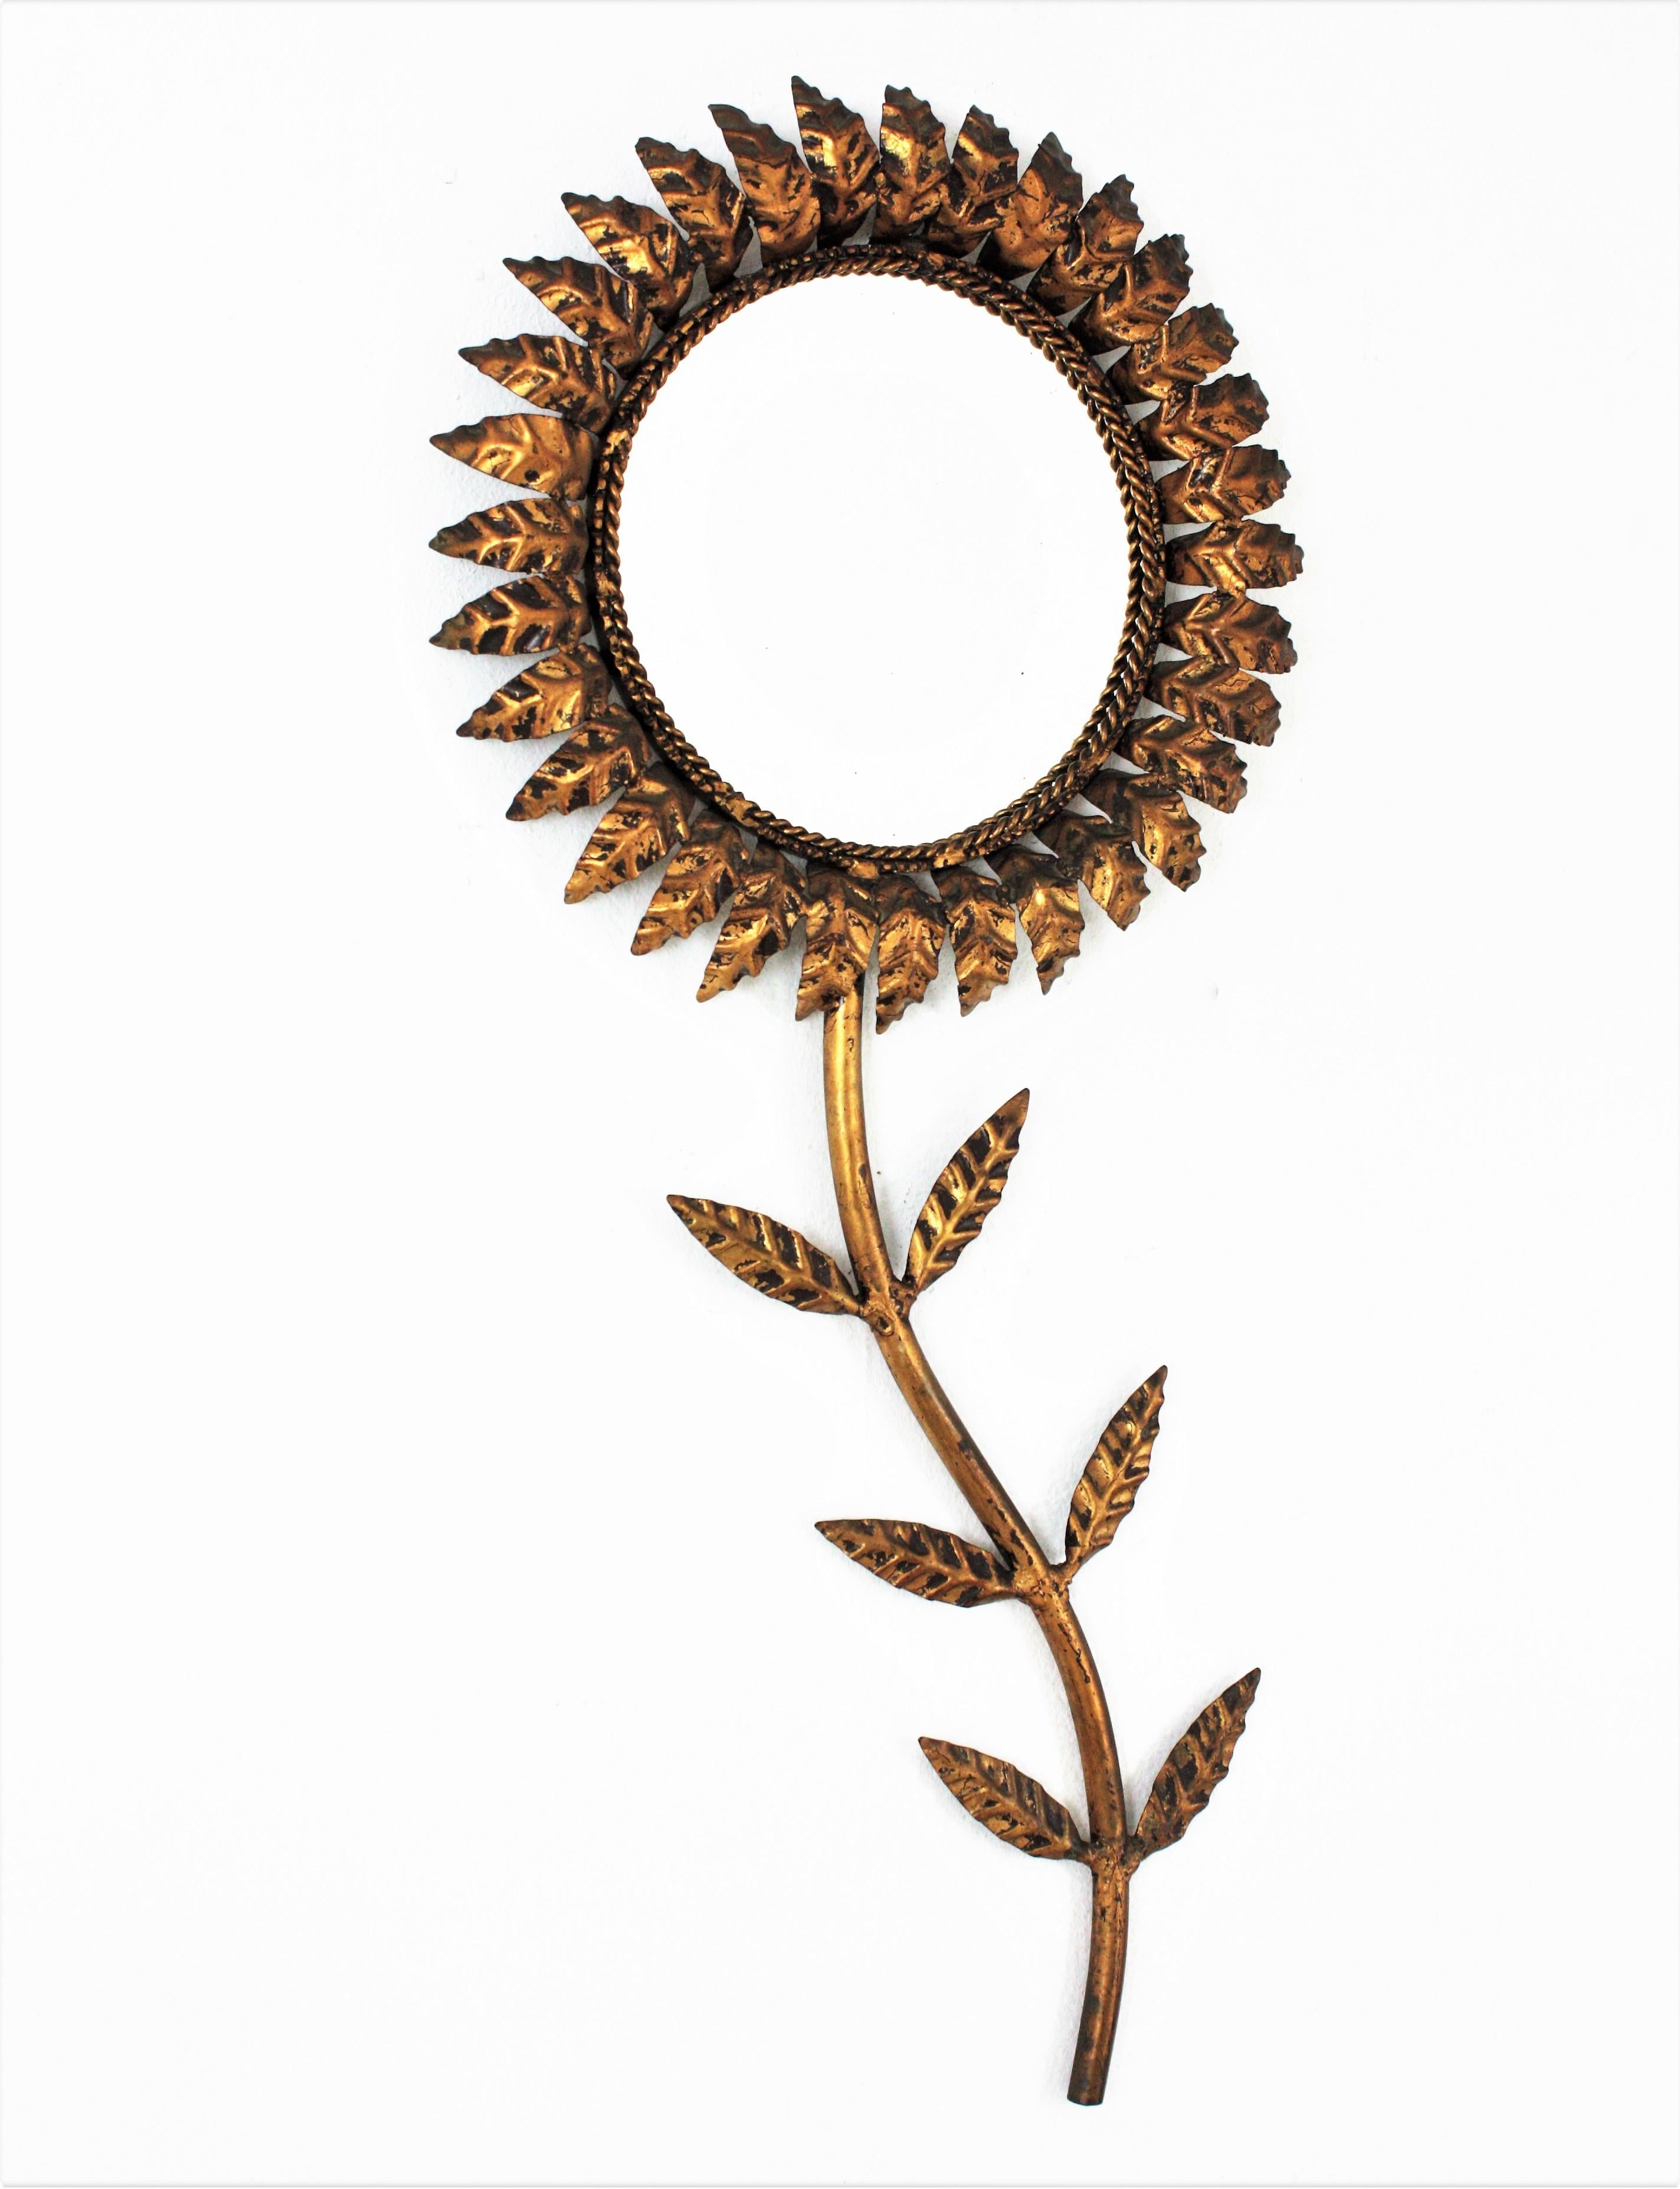 One of a kind  gilt iron sunflower wall mirror / wall sculpture, France, 1950s.
This spectacular wall mirror has an eye-catching flower shaped design with 
Handcrafted in gilt iron. It has a nice patina showing its original gold leaf